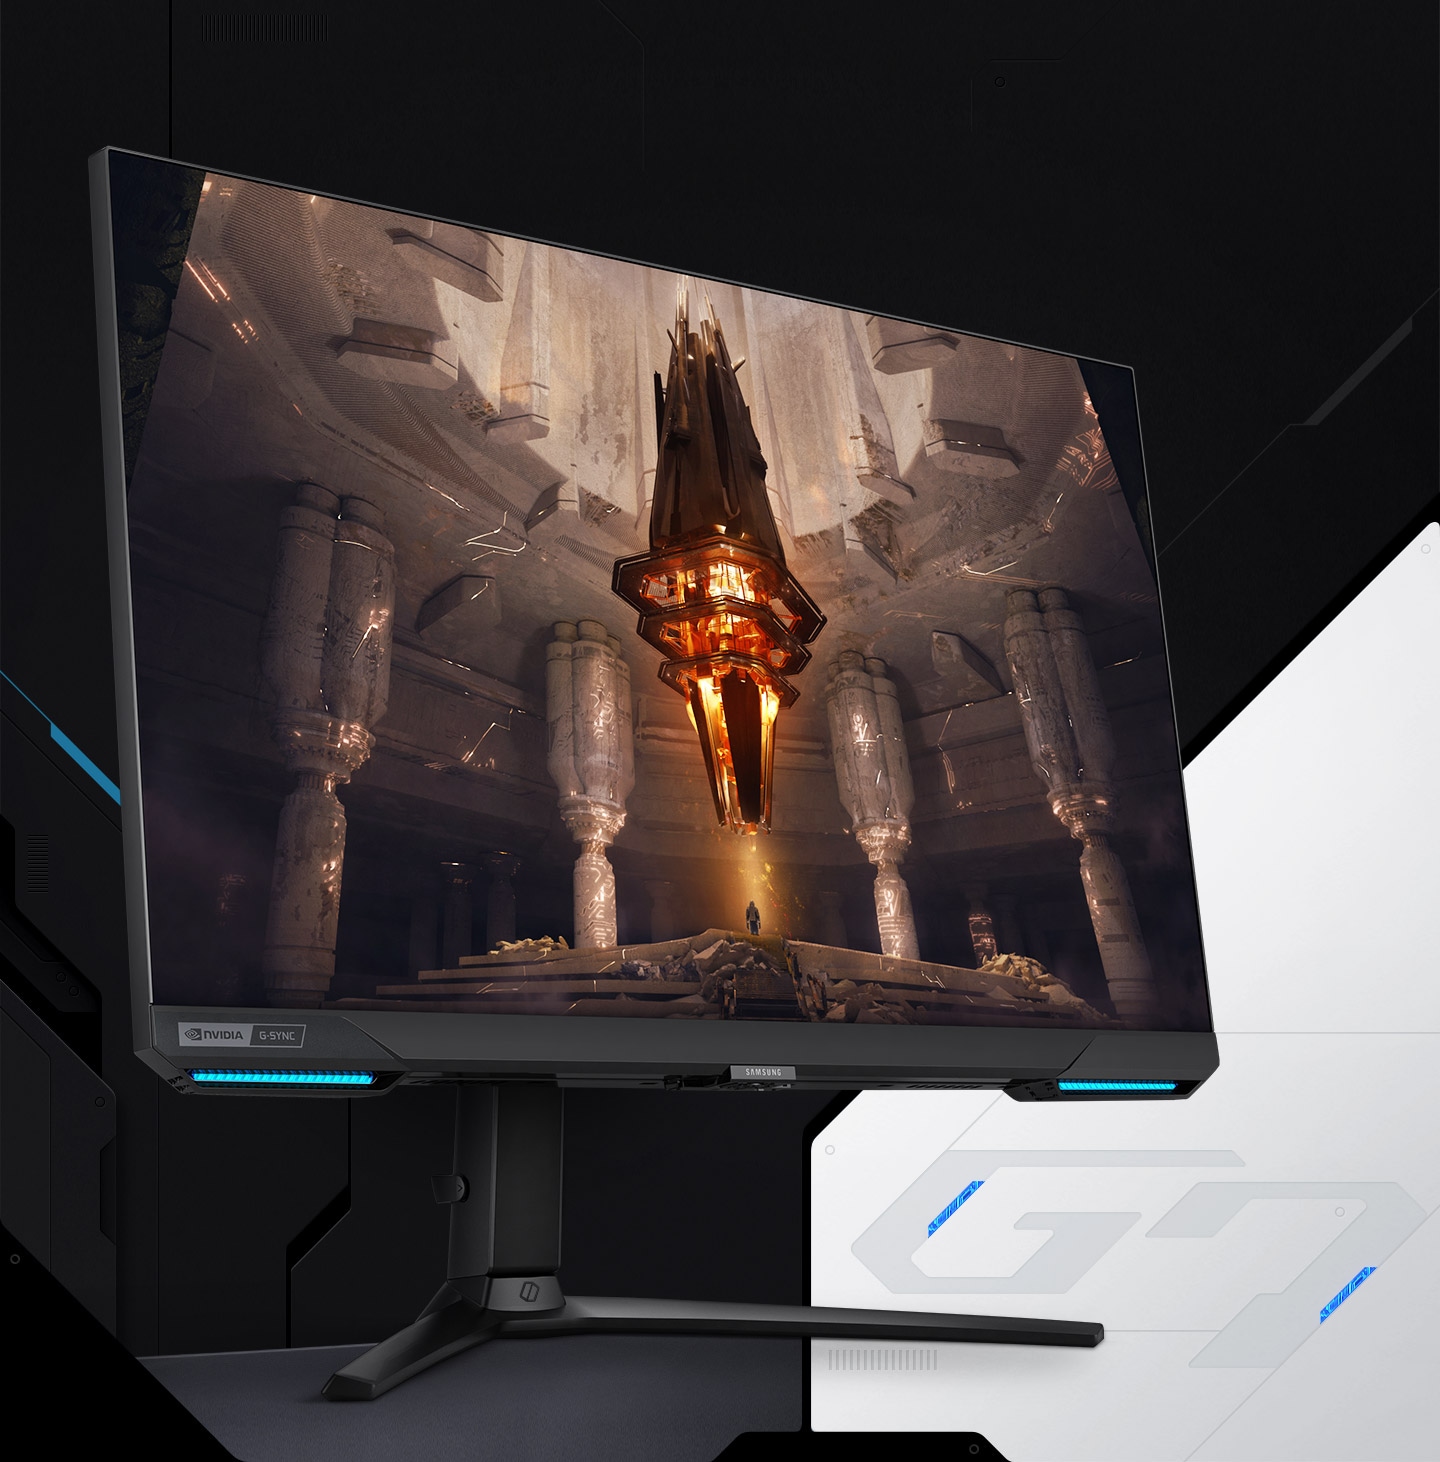 On the monitor display is a orange rocket ship with light emitting from its engine exhausts inside an underground cave. The rocket ship is set to launch out of the opening above, and surrounded by stone pillars and steps. &quot"G7&quot" logo is placed on the right side of the monitor stand.